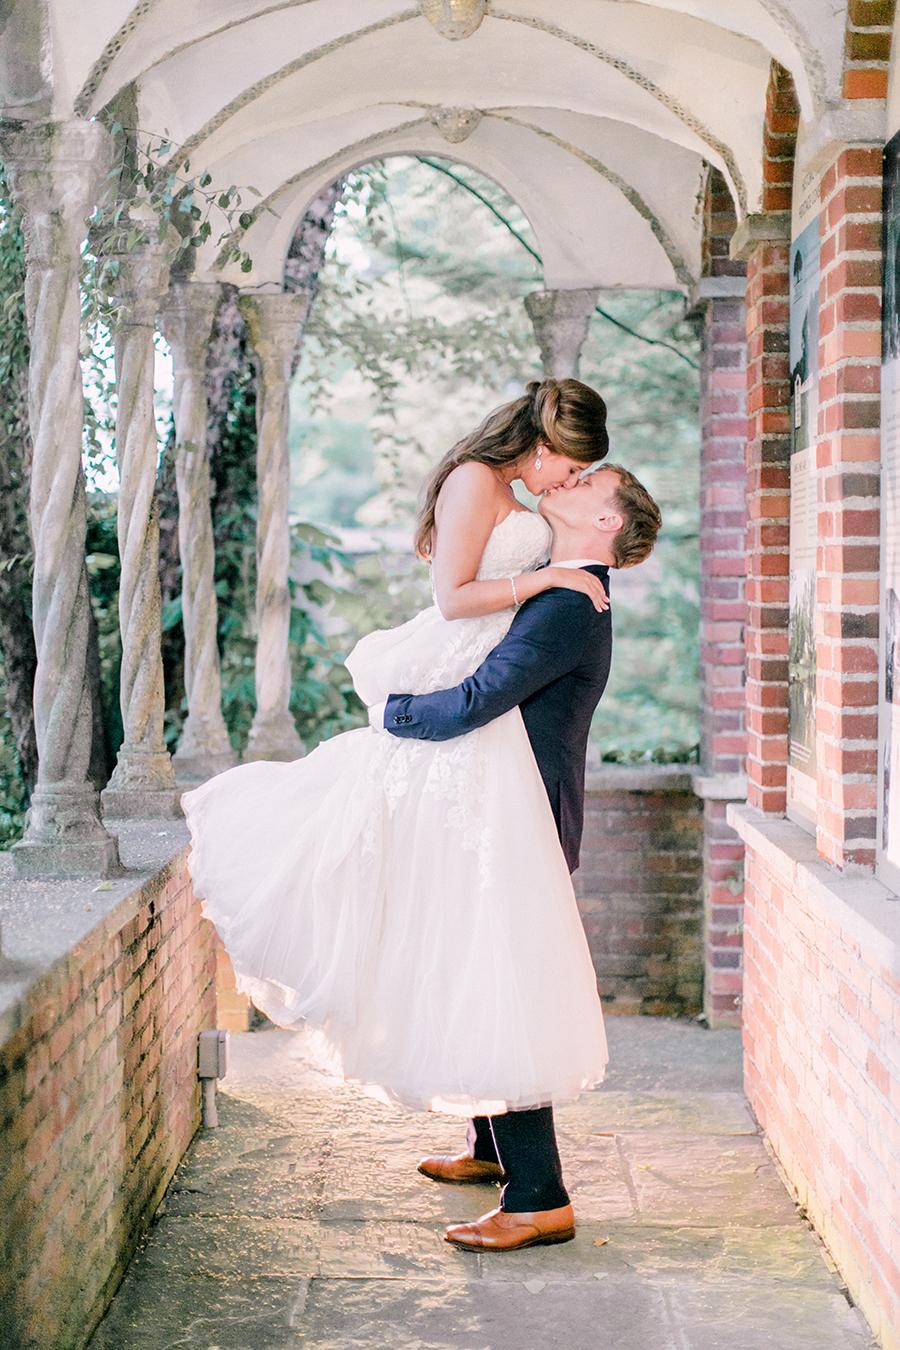 A Romantic Fairytale Wedding At Aldie Mansion Emily Wren Photography Philly In Love Philadelphia Wedding Blog Venues Vendors